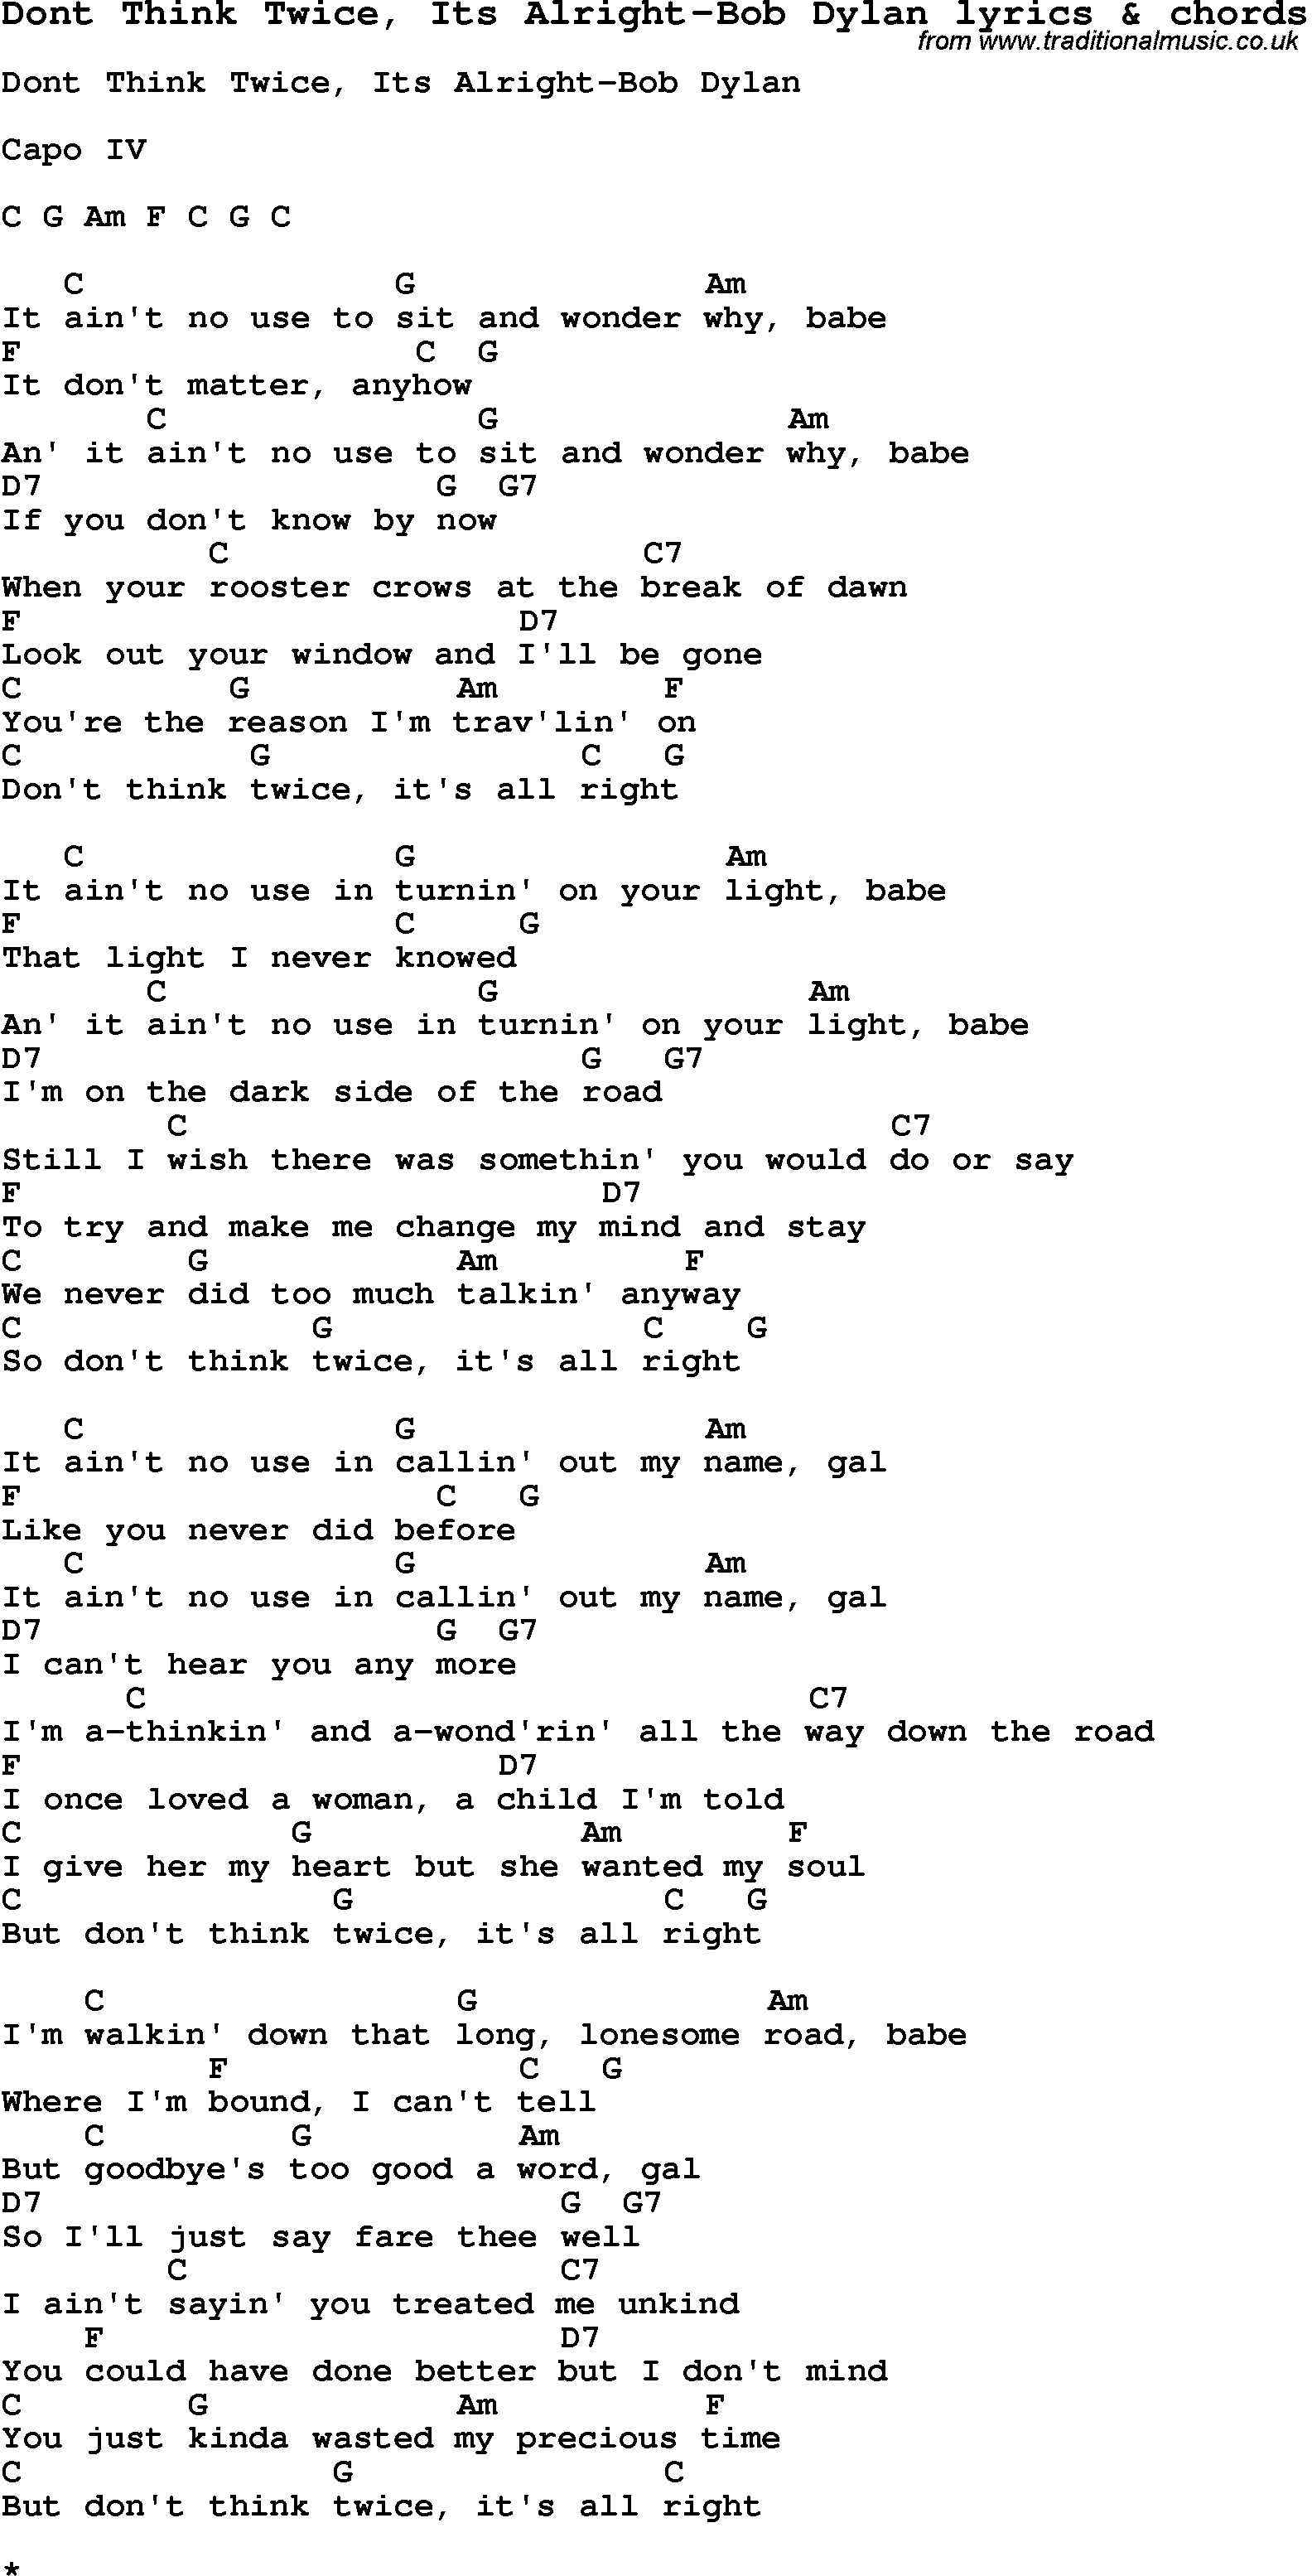 Love Song Lyrics for: Dont Think Twice, Its Alright-Bob Dylan with chords for Ukulele, Guitar Banjo etc.